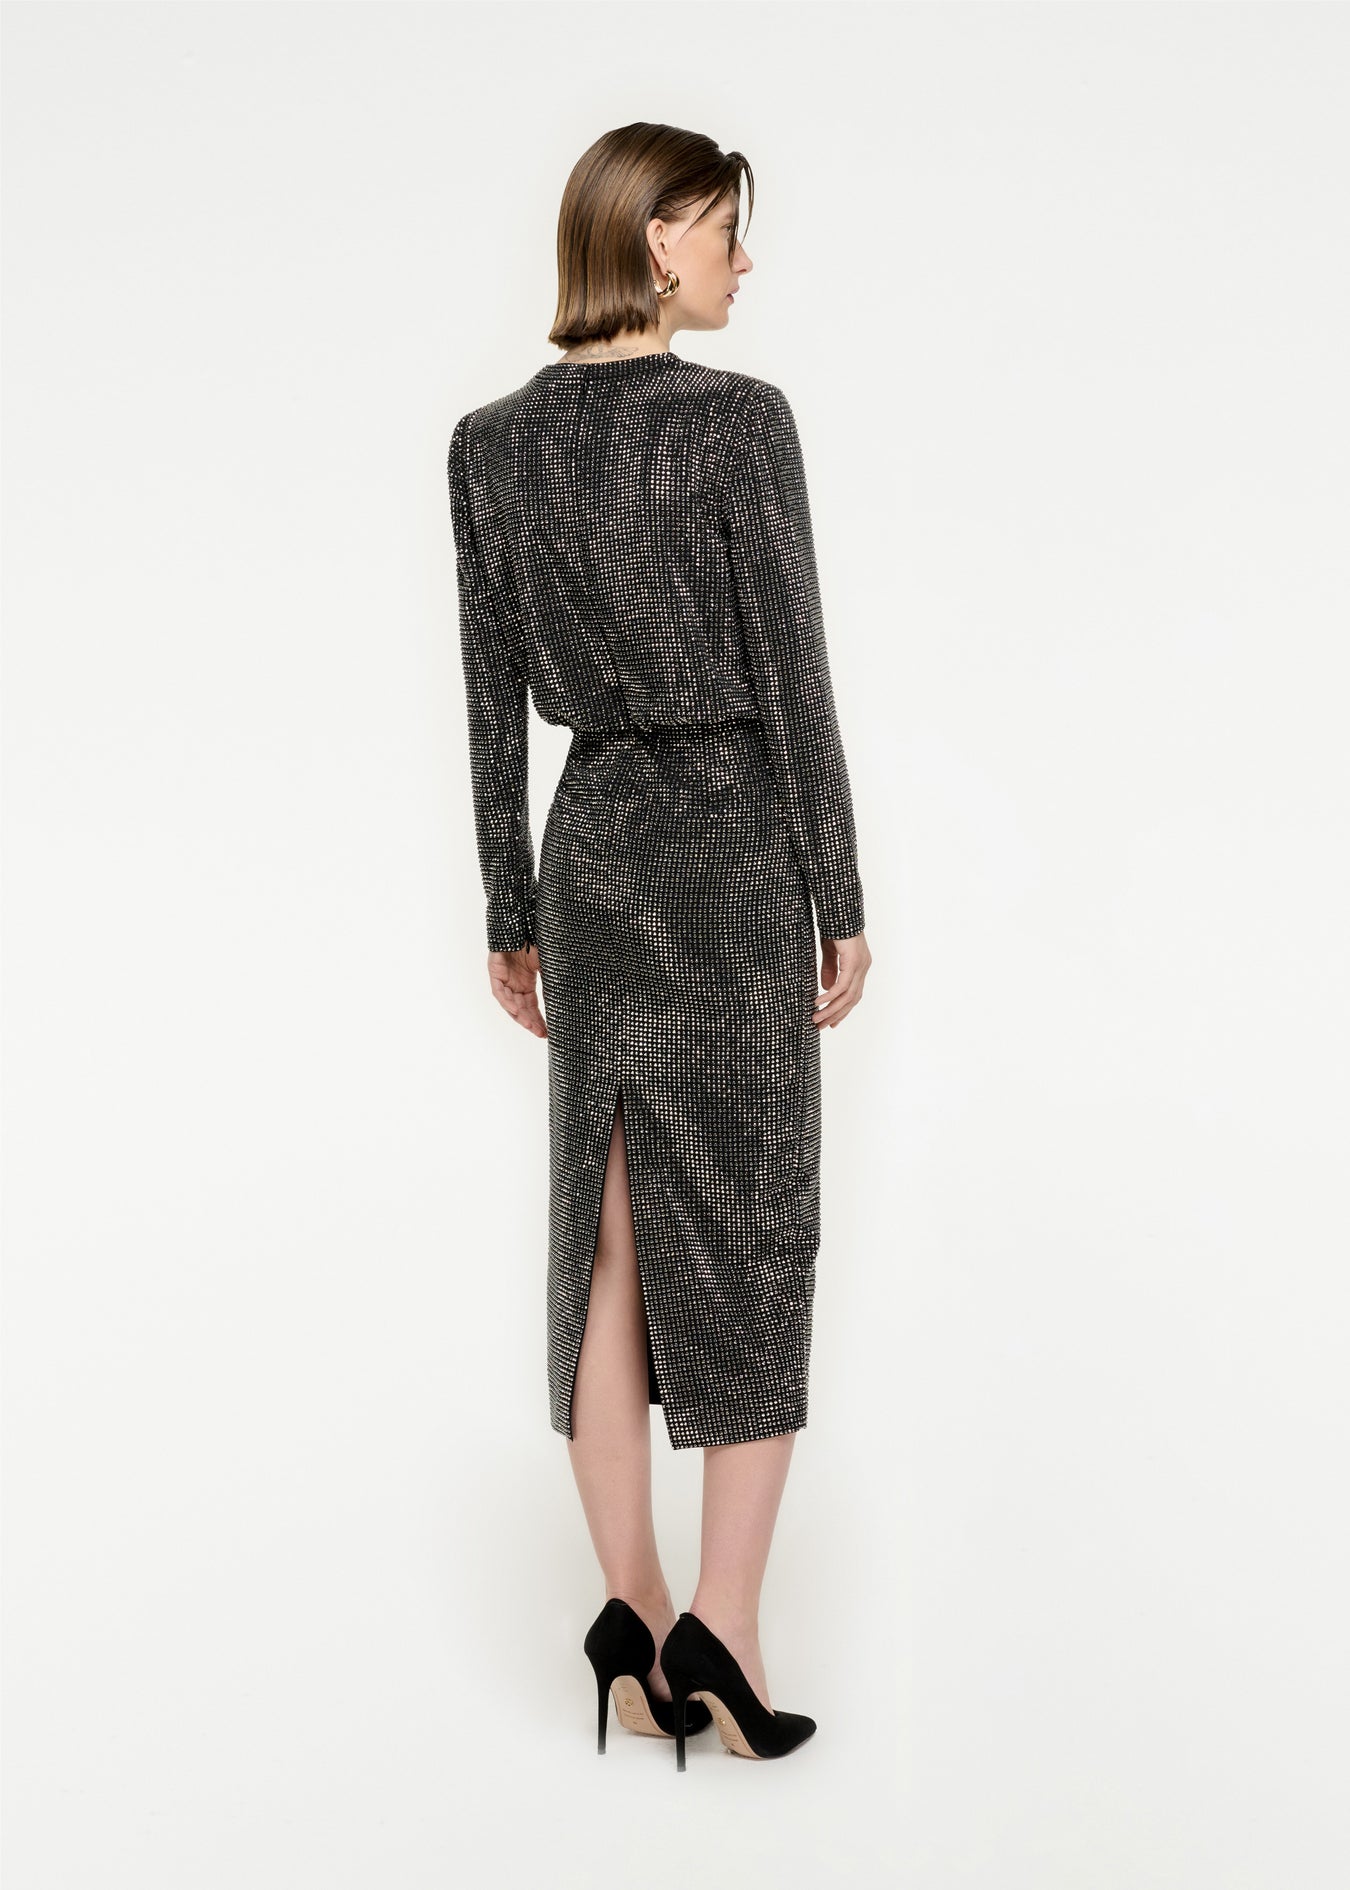 The back of a woman wearing the Long Sleeve Diamante Midi Dress in Black